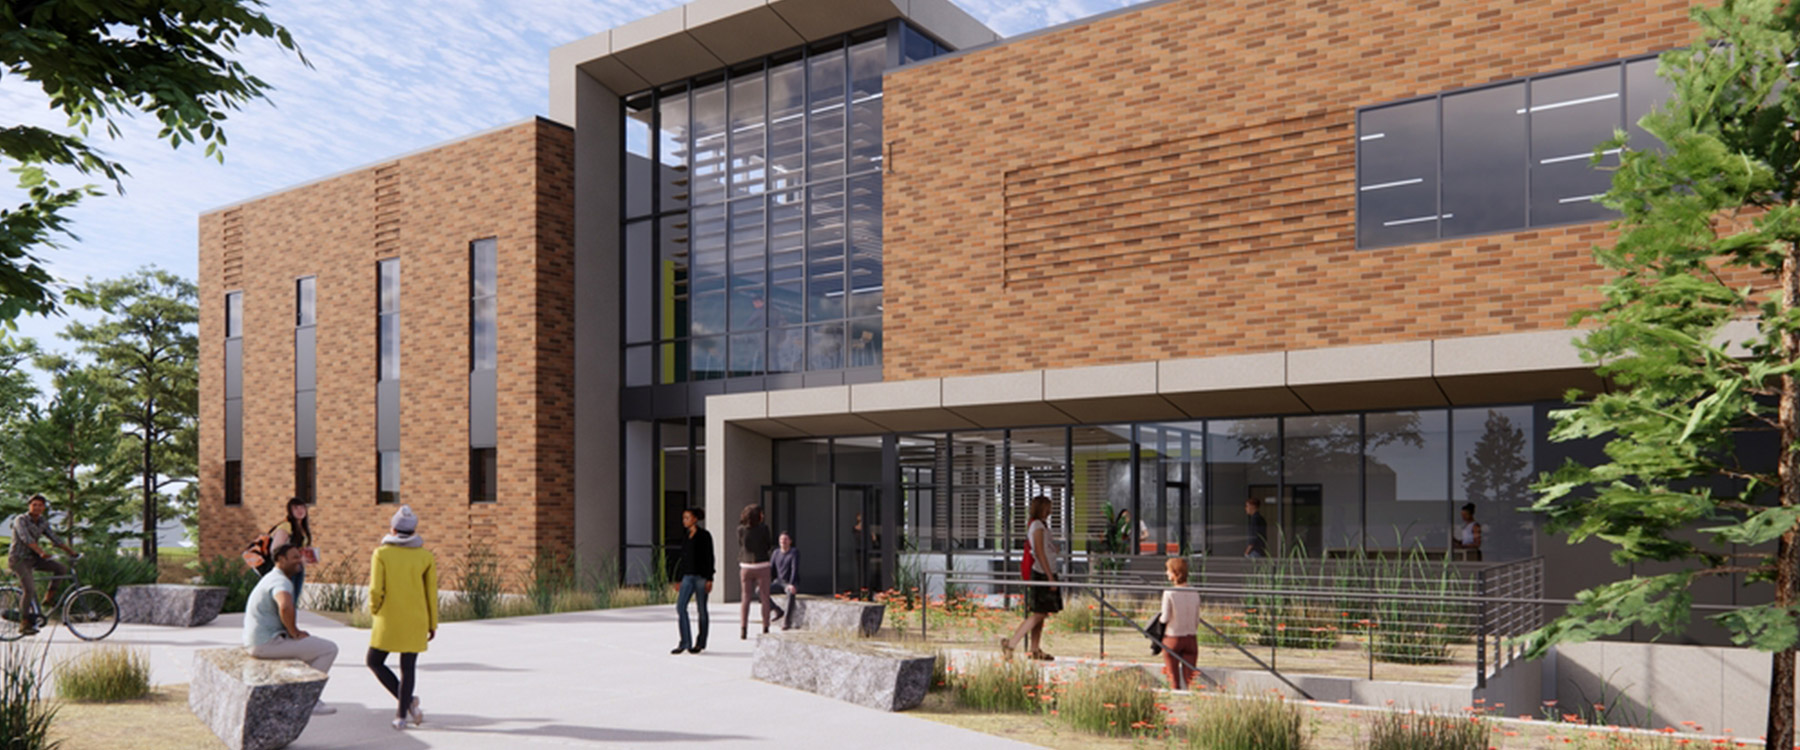 Render of Dornsife Health Science Building exterior with students mingling outside.